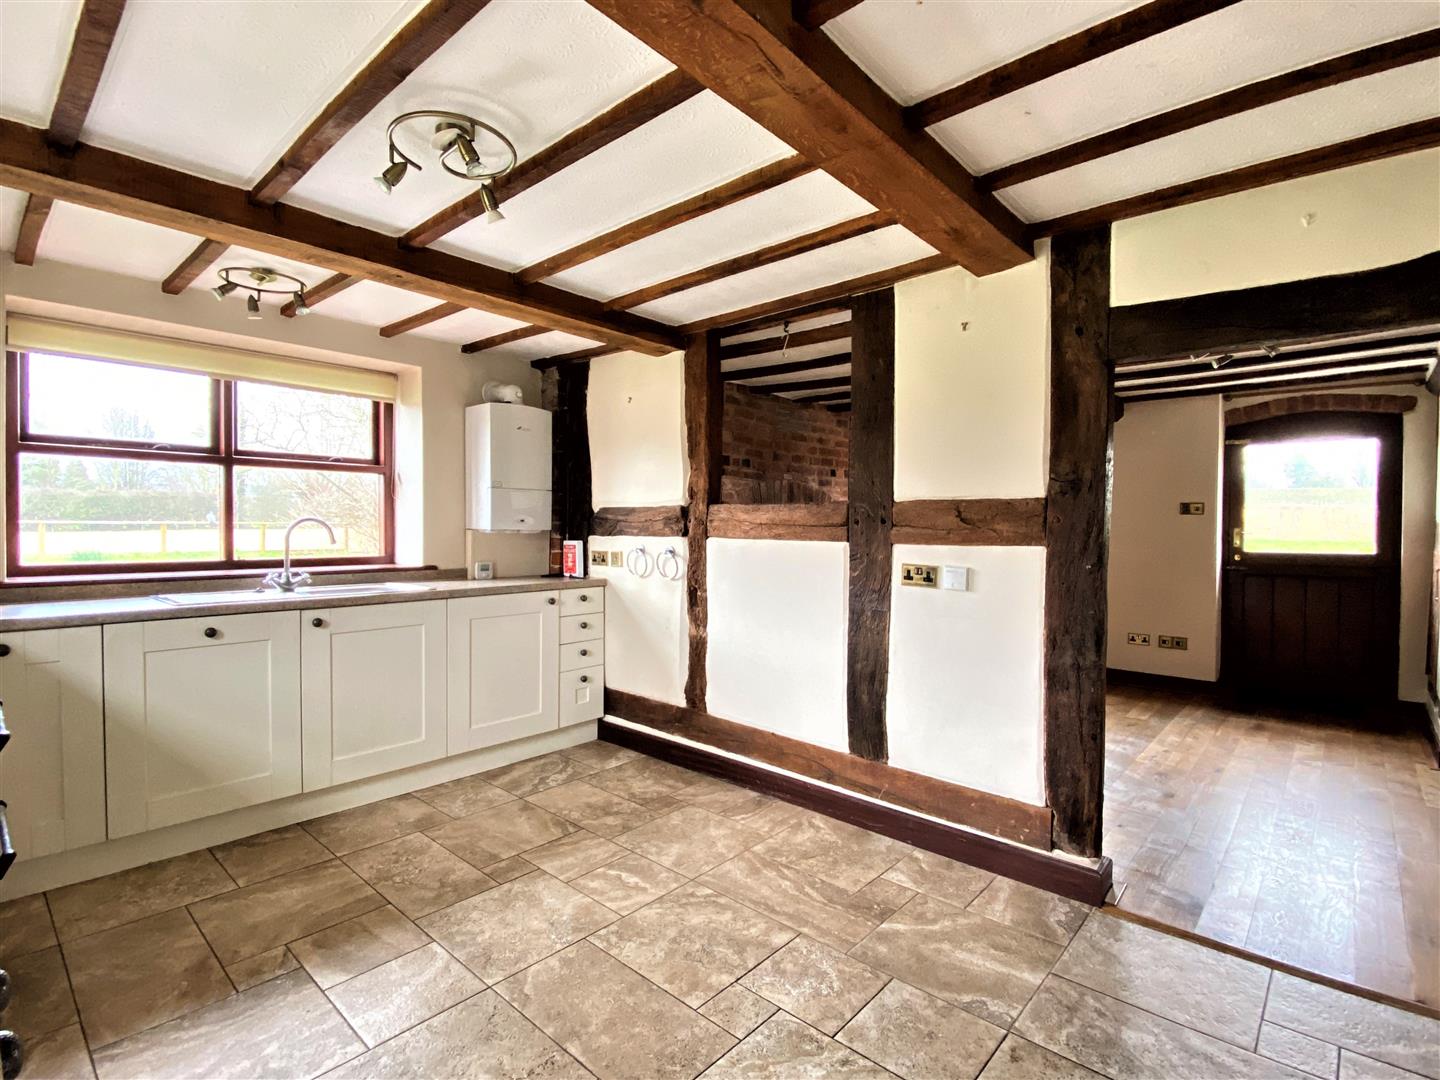 3 bed detached for sale in Bodenham 7